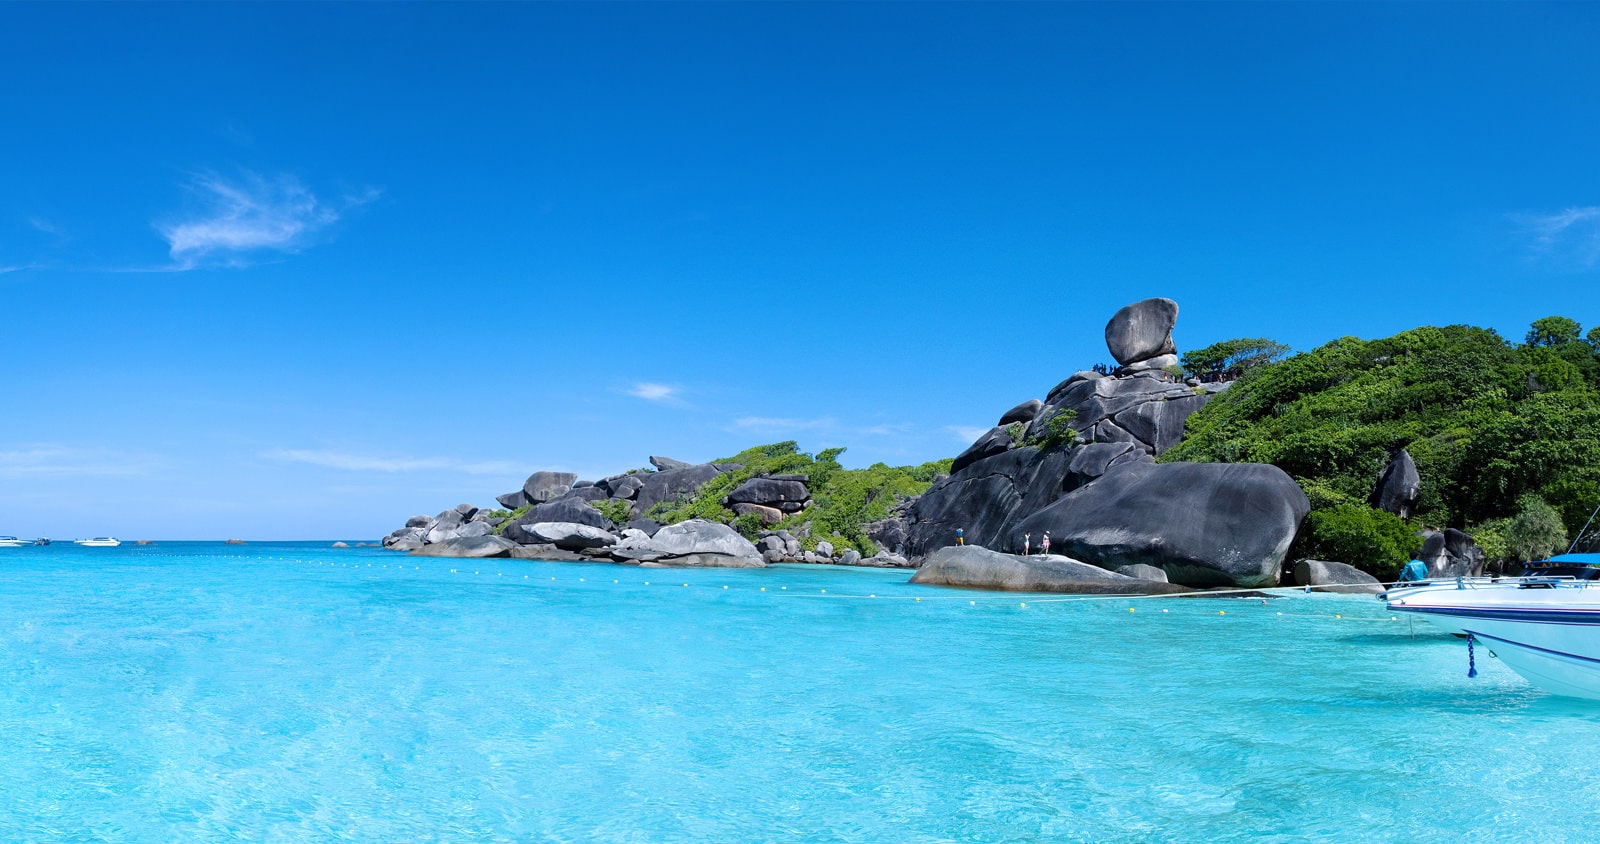 similan islands in thailand: Top Attractions & Tours in Similan Islands